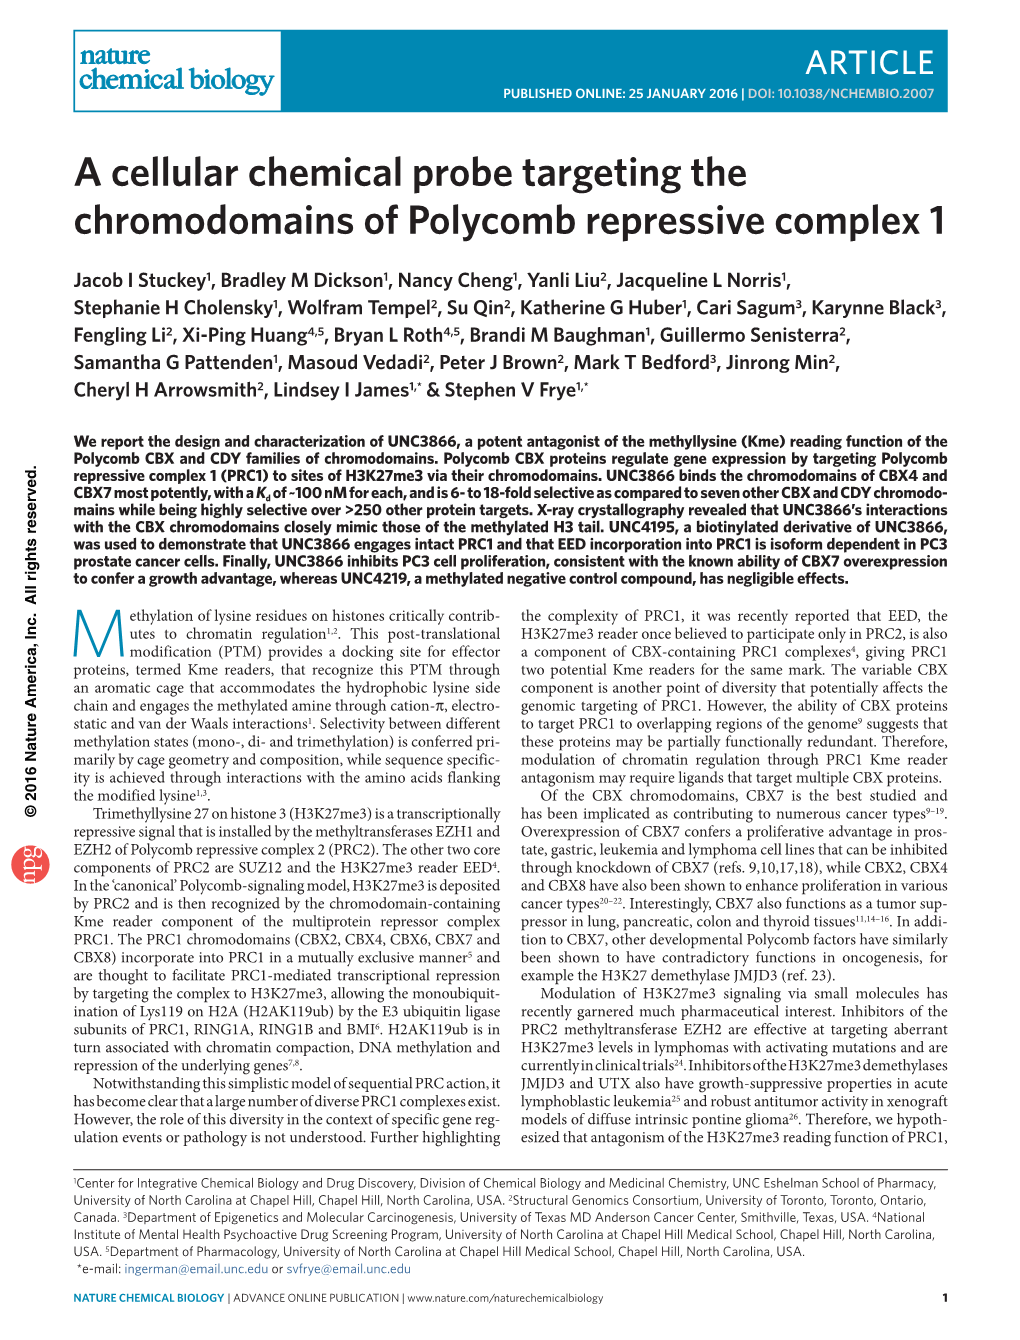 A Cellular Chemical Probe Targeting the Chromodomains of Polycomb